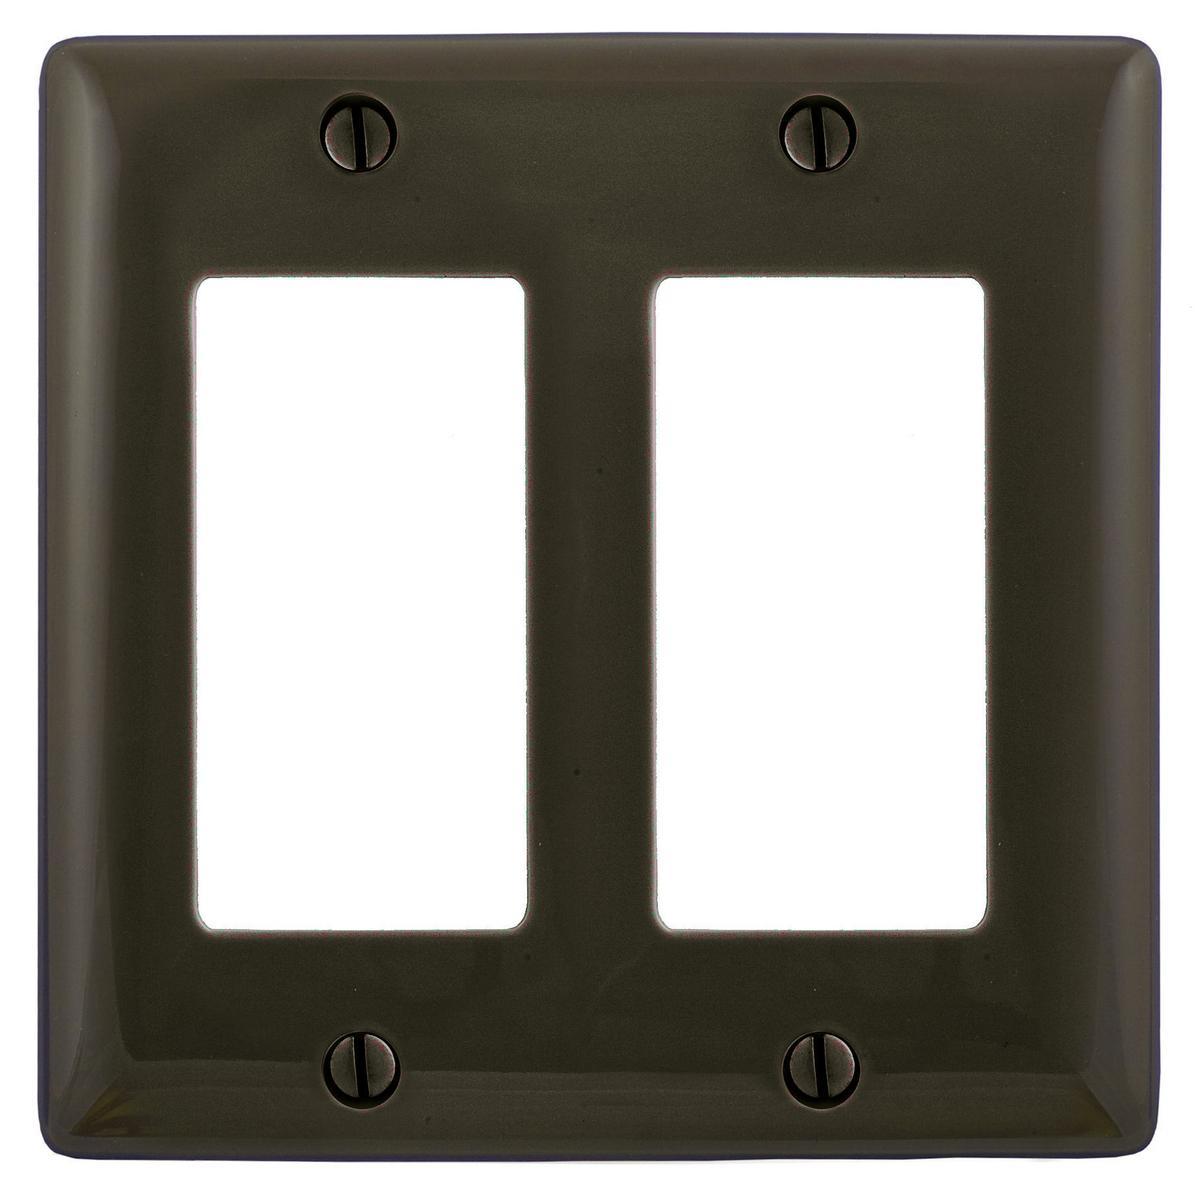 Hubbell NP262 Wallplates and Box Covers, Wallplate, Nylon, 2-Gang, 2) Decorator, Brown  ; Reinforcement ribs for extra strength ; Captive screw feature holds mounting screw in place ; High-impact, self-extinguishing nylon material ; Standard Size is 1/8" larger to give